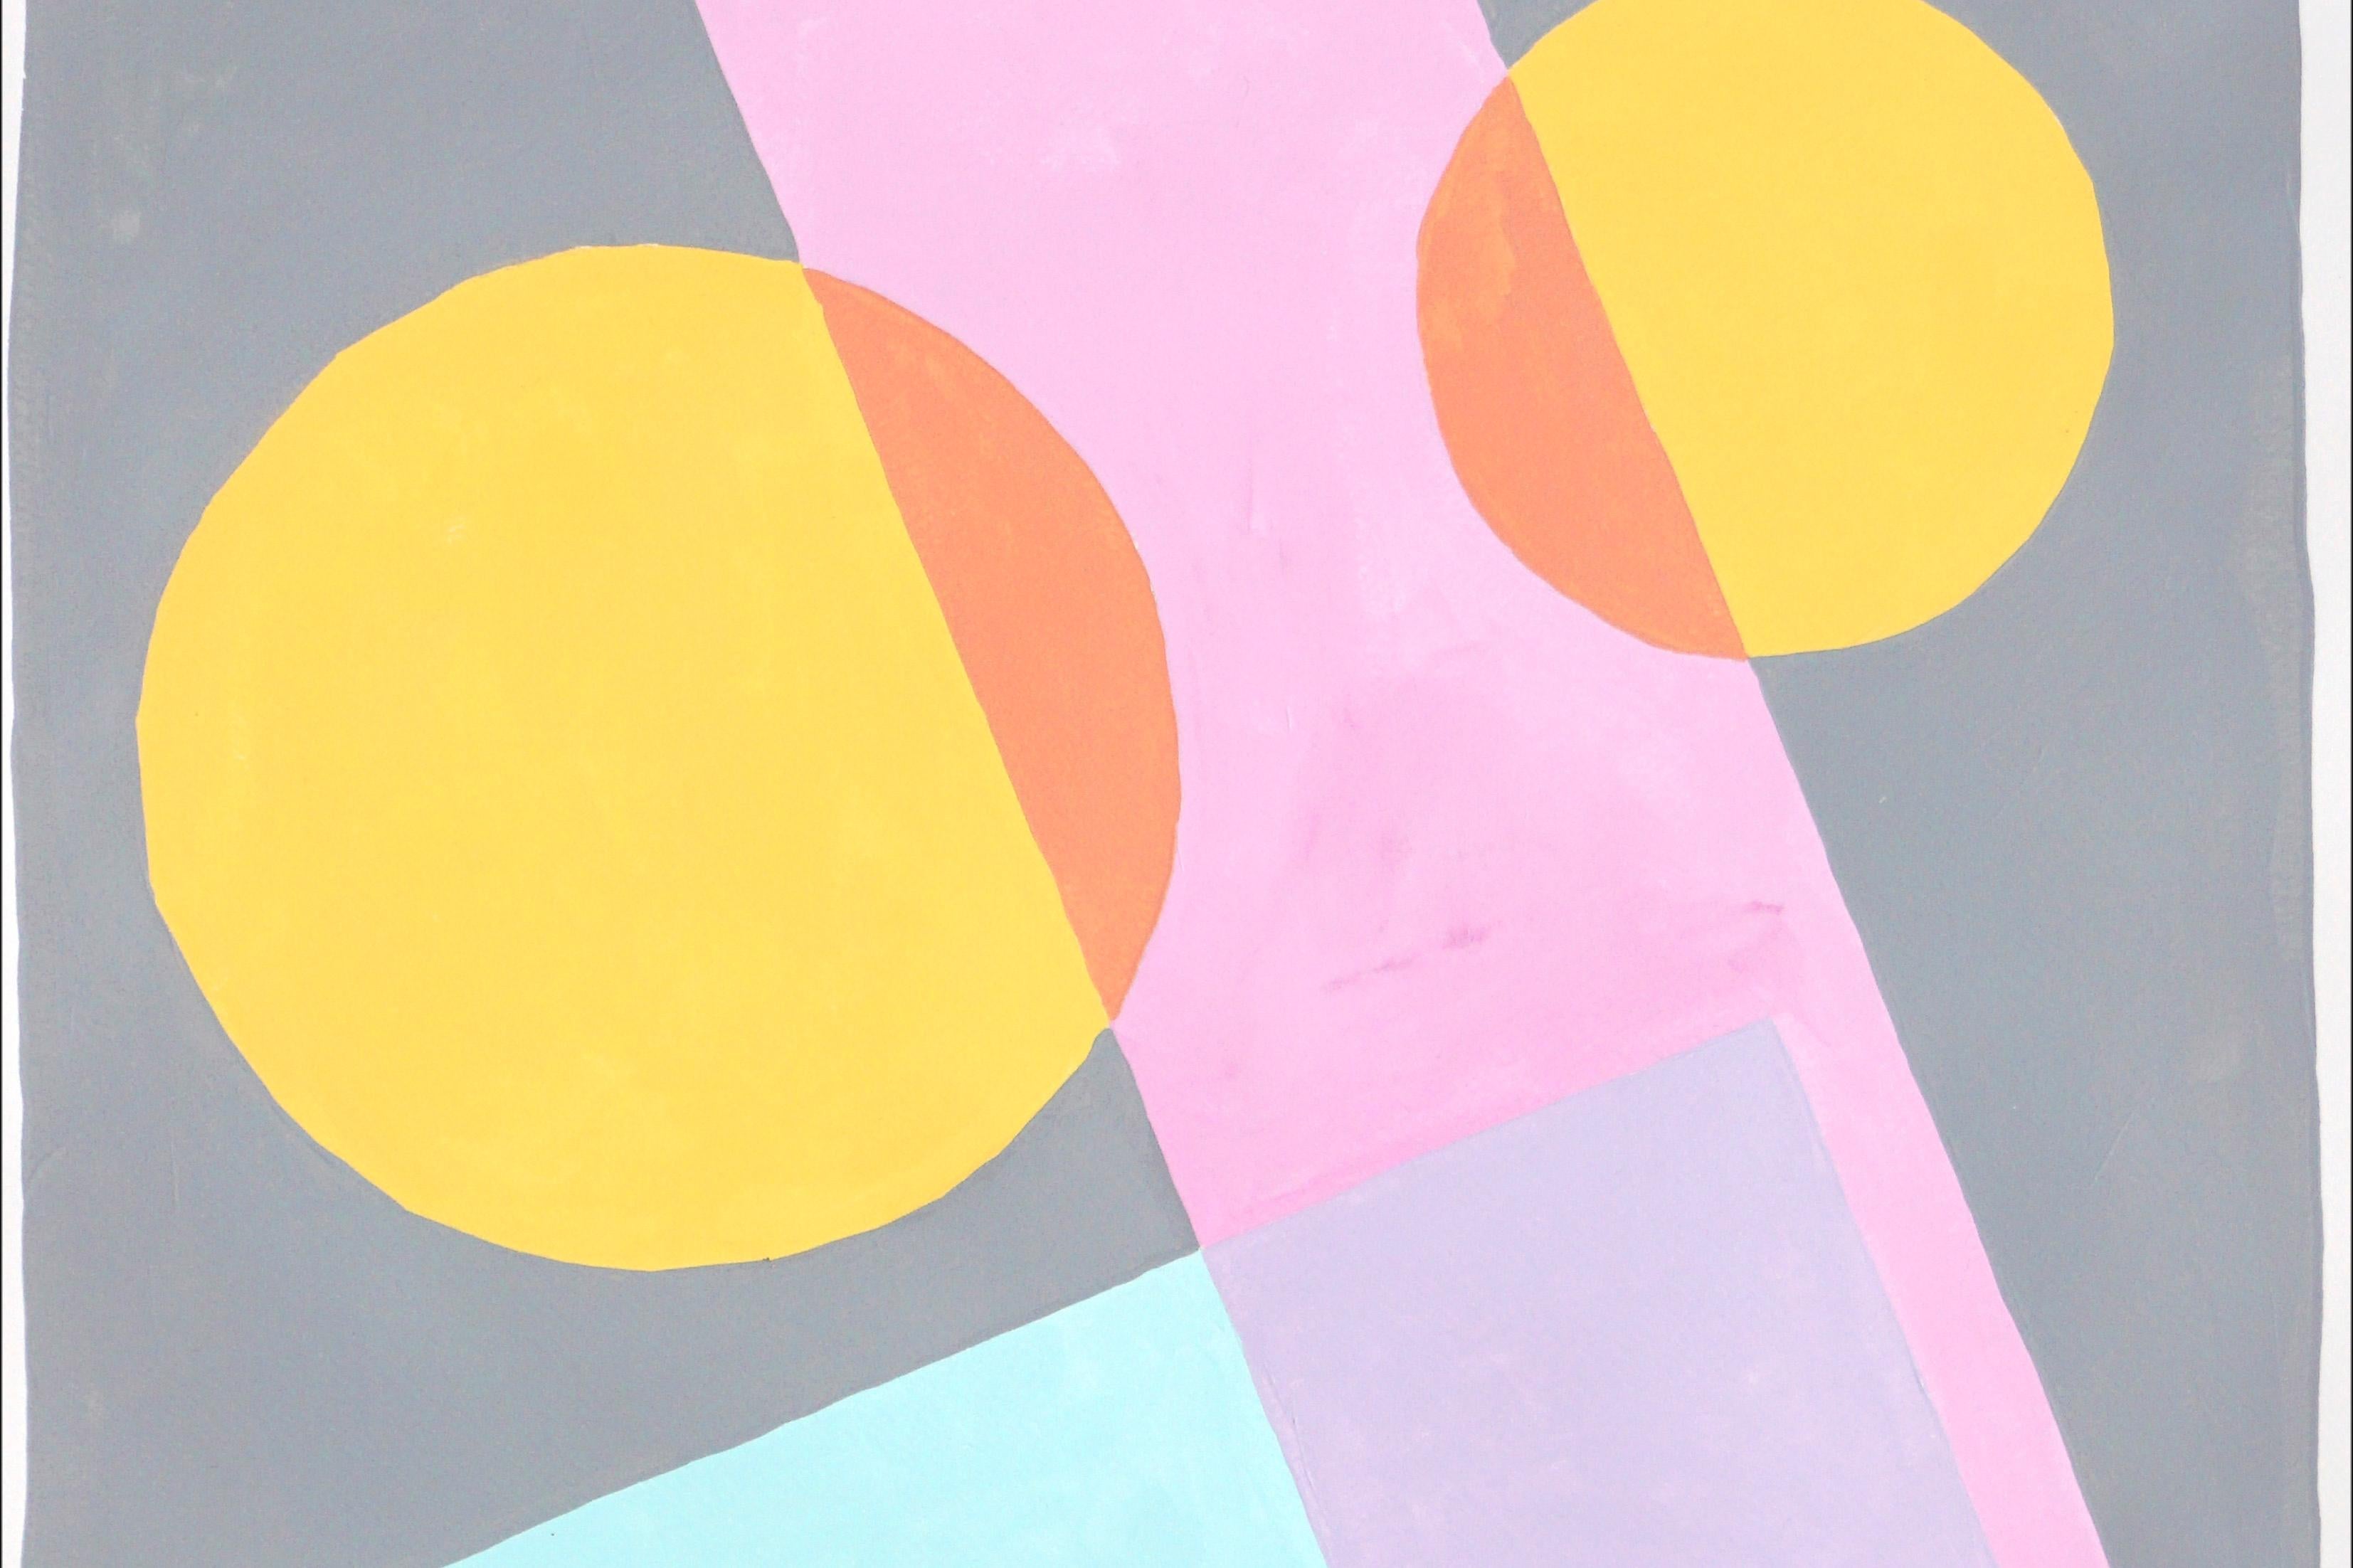 Pastel Constructivist Forms, Soft Tones Geometric Painting, Blue, Pink, Yellow - Beige Abstract Painting by Ryan Rivadeneyra